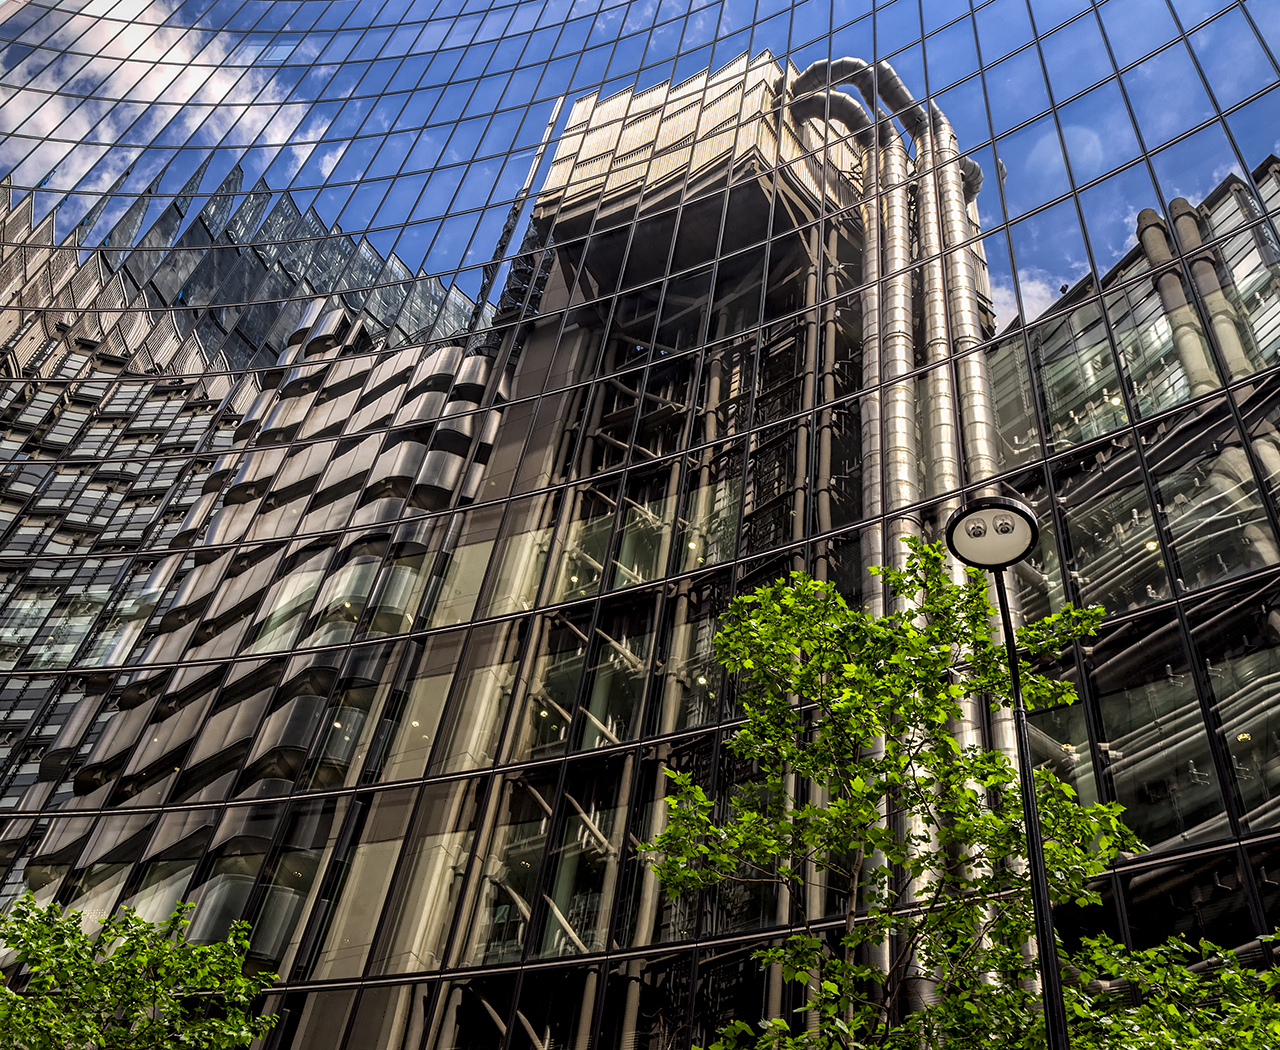 LLOYDS REFLECTIONS by Chris Houldsworth